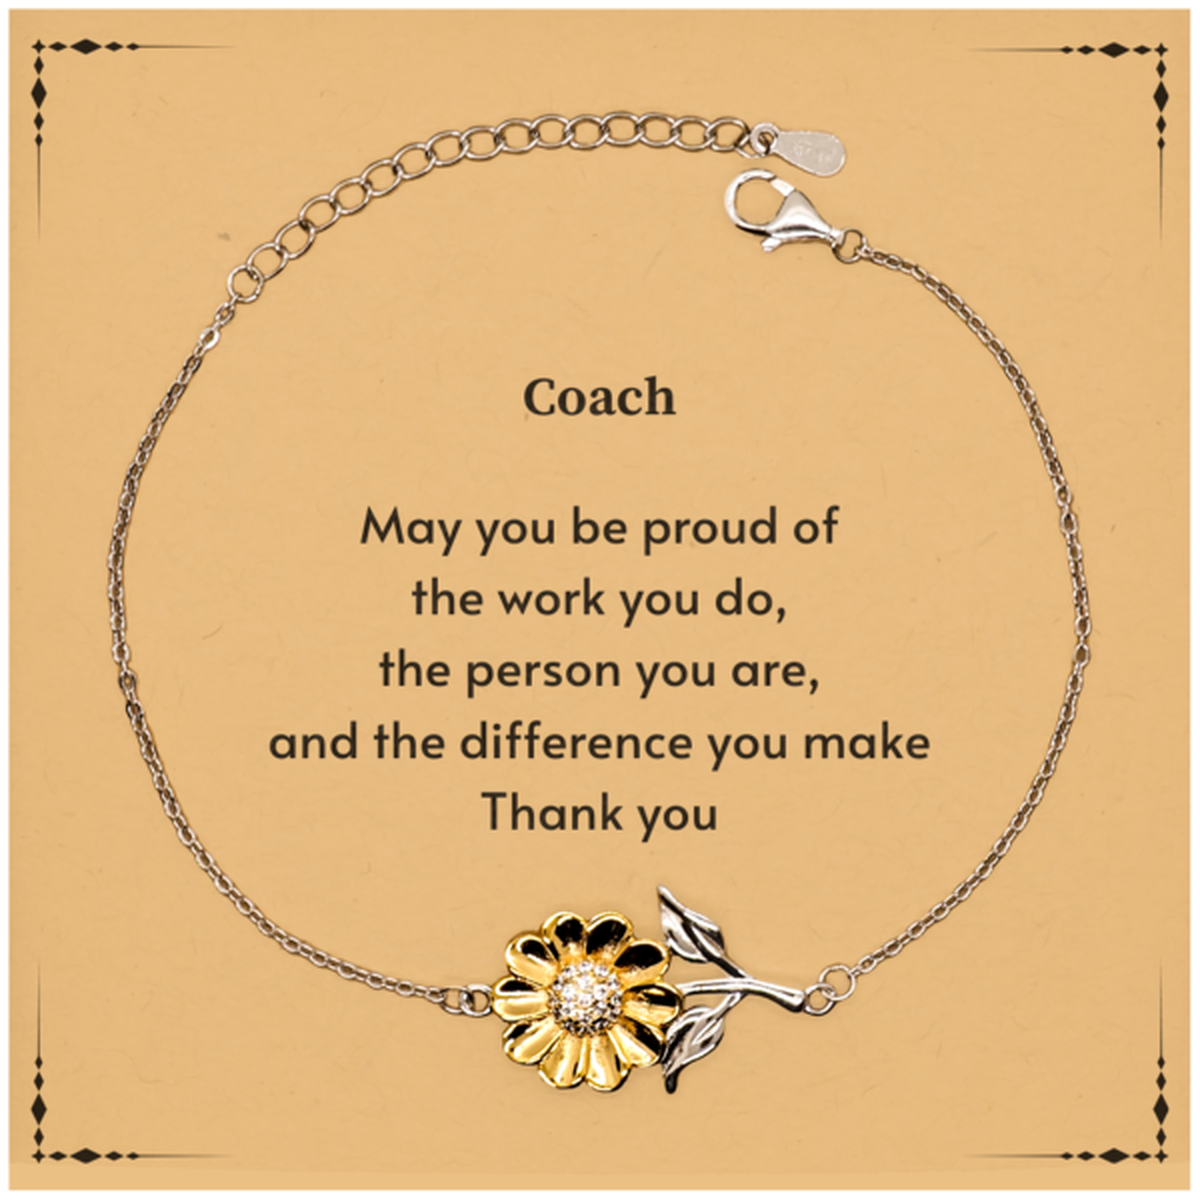 Heartwarming Sunflower Bracelet Retirement Coworkers Gifts for Coach, Coach May You be proud of the work you do, the person you are Gifts for Boss Men Women Friends